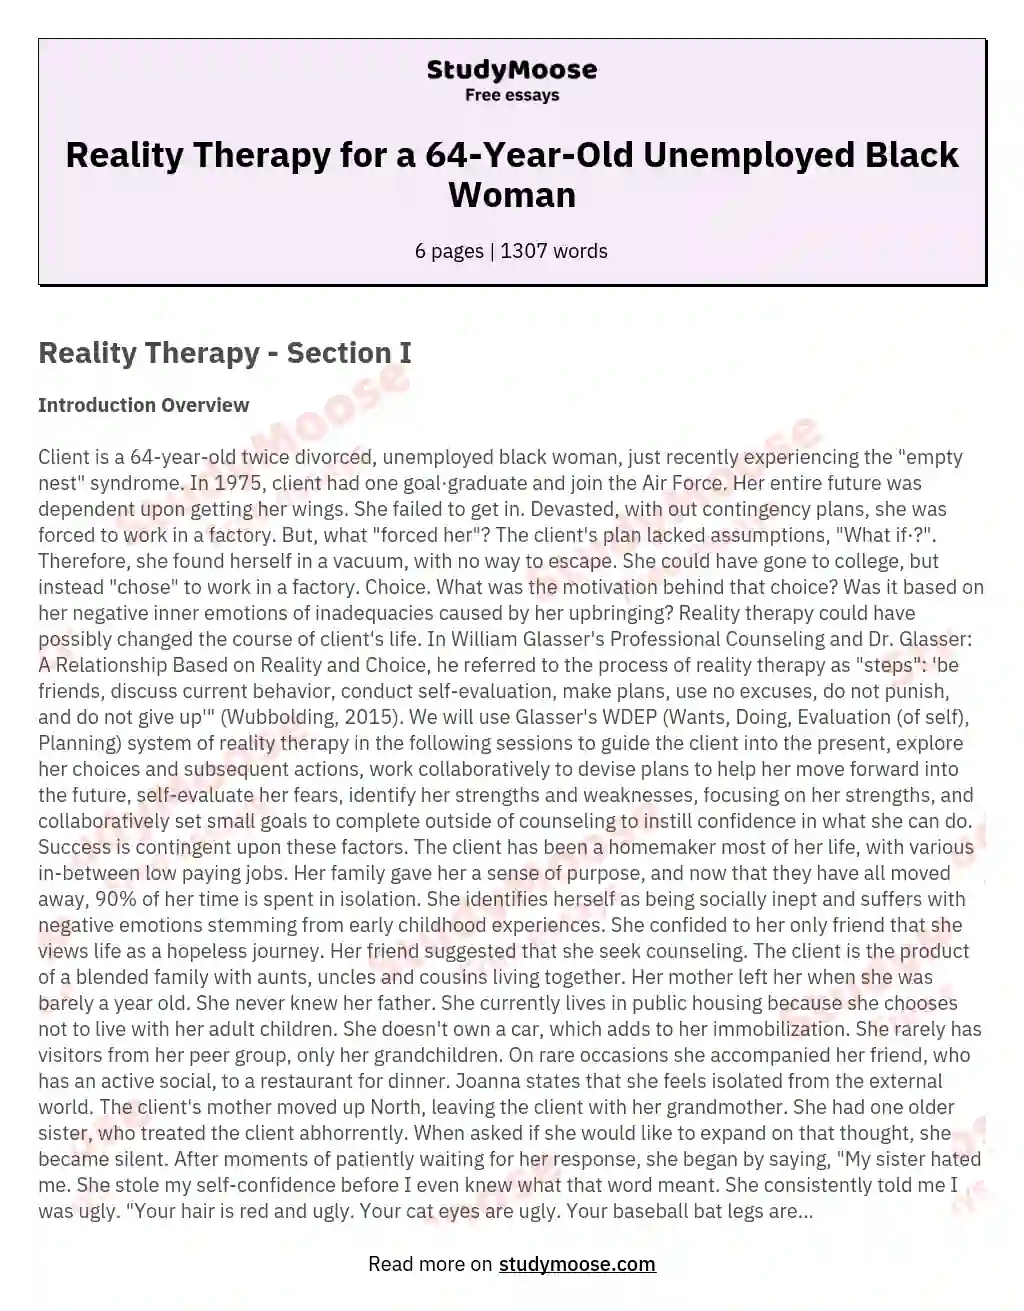 Reality Therapy for a 64-Year-Old Unemployed Black Woman essay